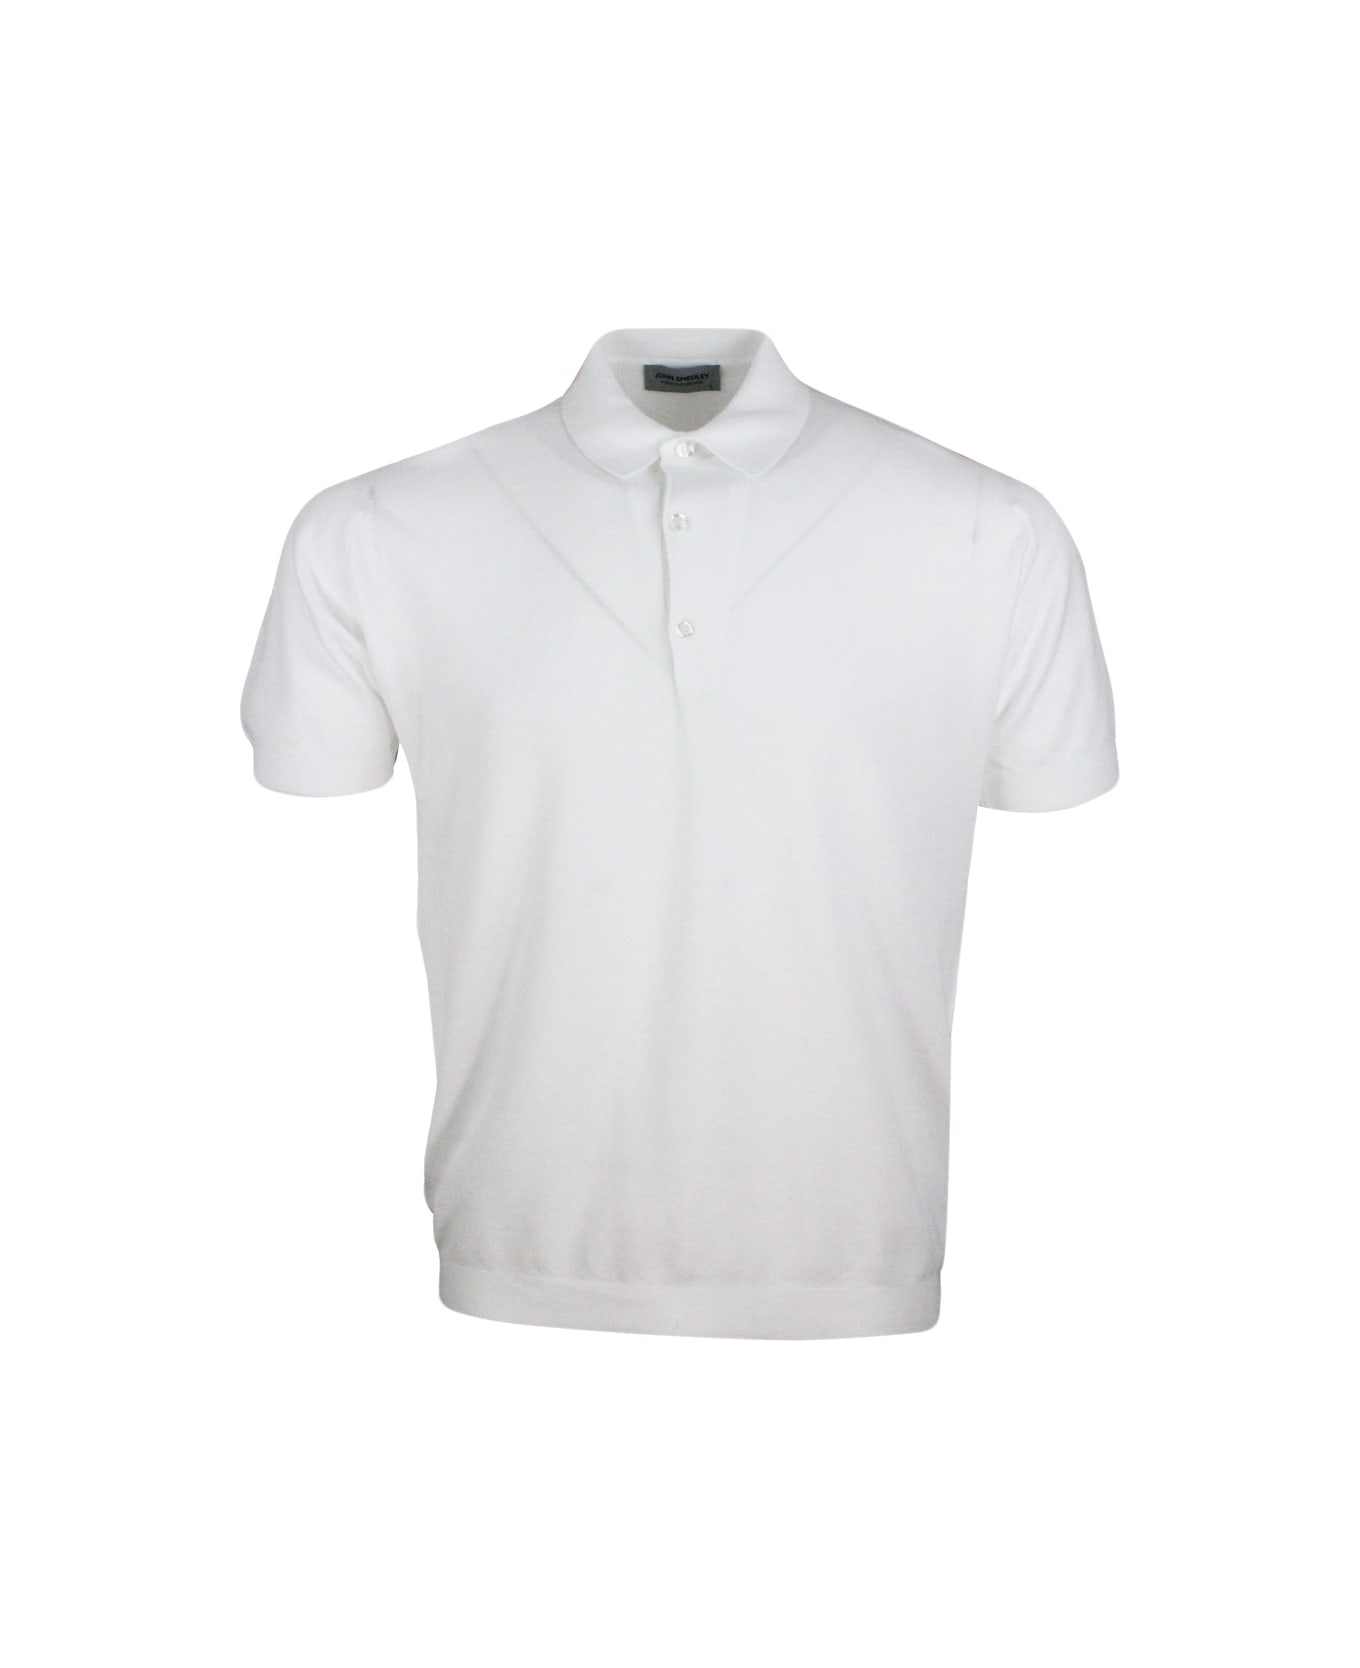 John Smedley Short-sleeved Polo Shirt In Extrafine Piqué Cotton Thread With Three Buttons - White ポロシャツ